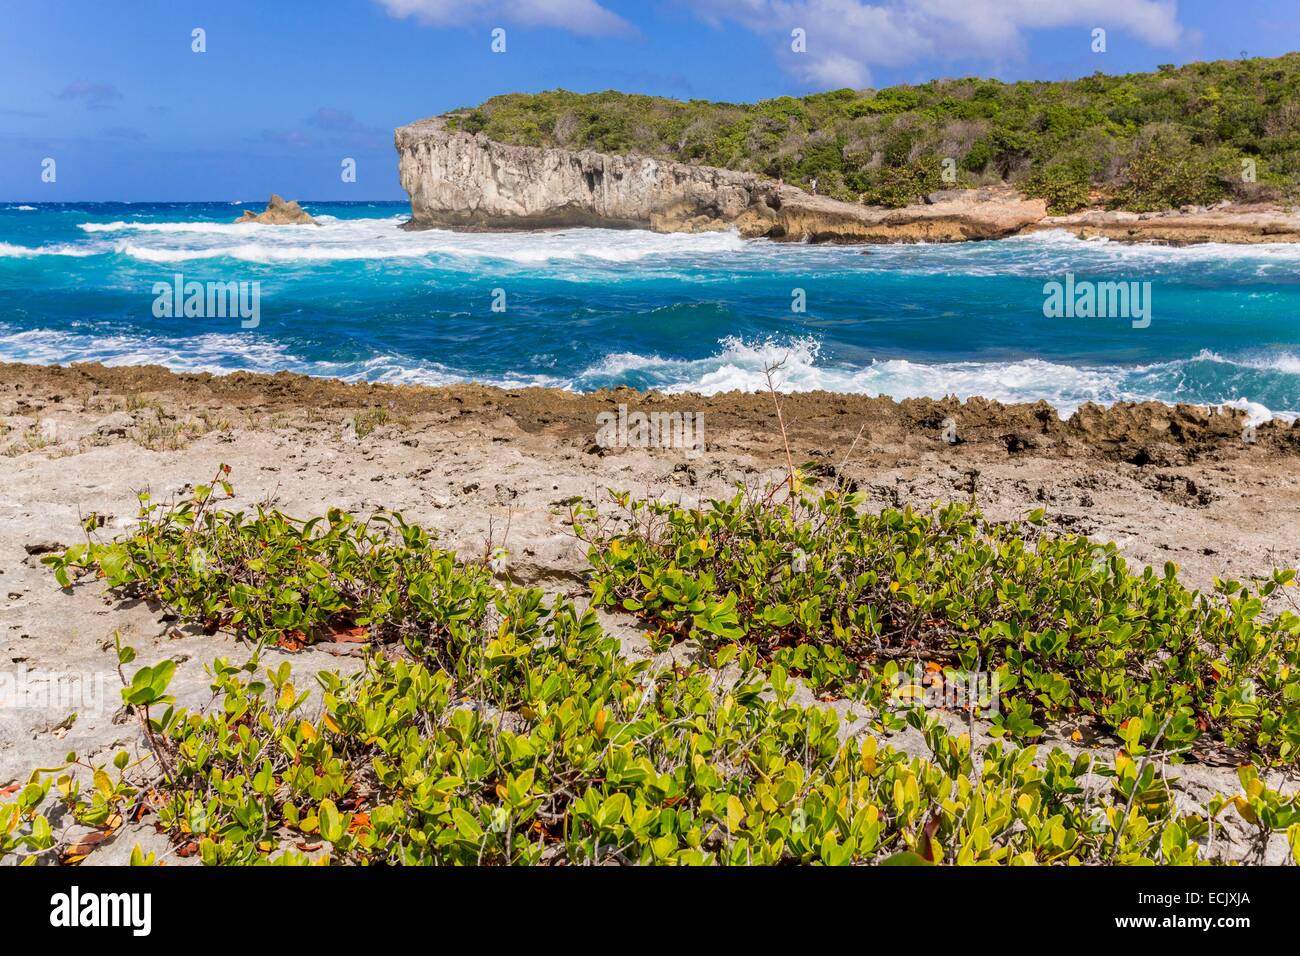 La France, la Guadeloupe (French West Indies), Grande Terre, Anse Bertrand, lagoon Hell's Gate Banque D'Images